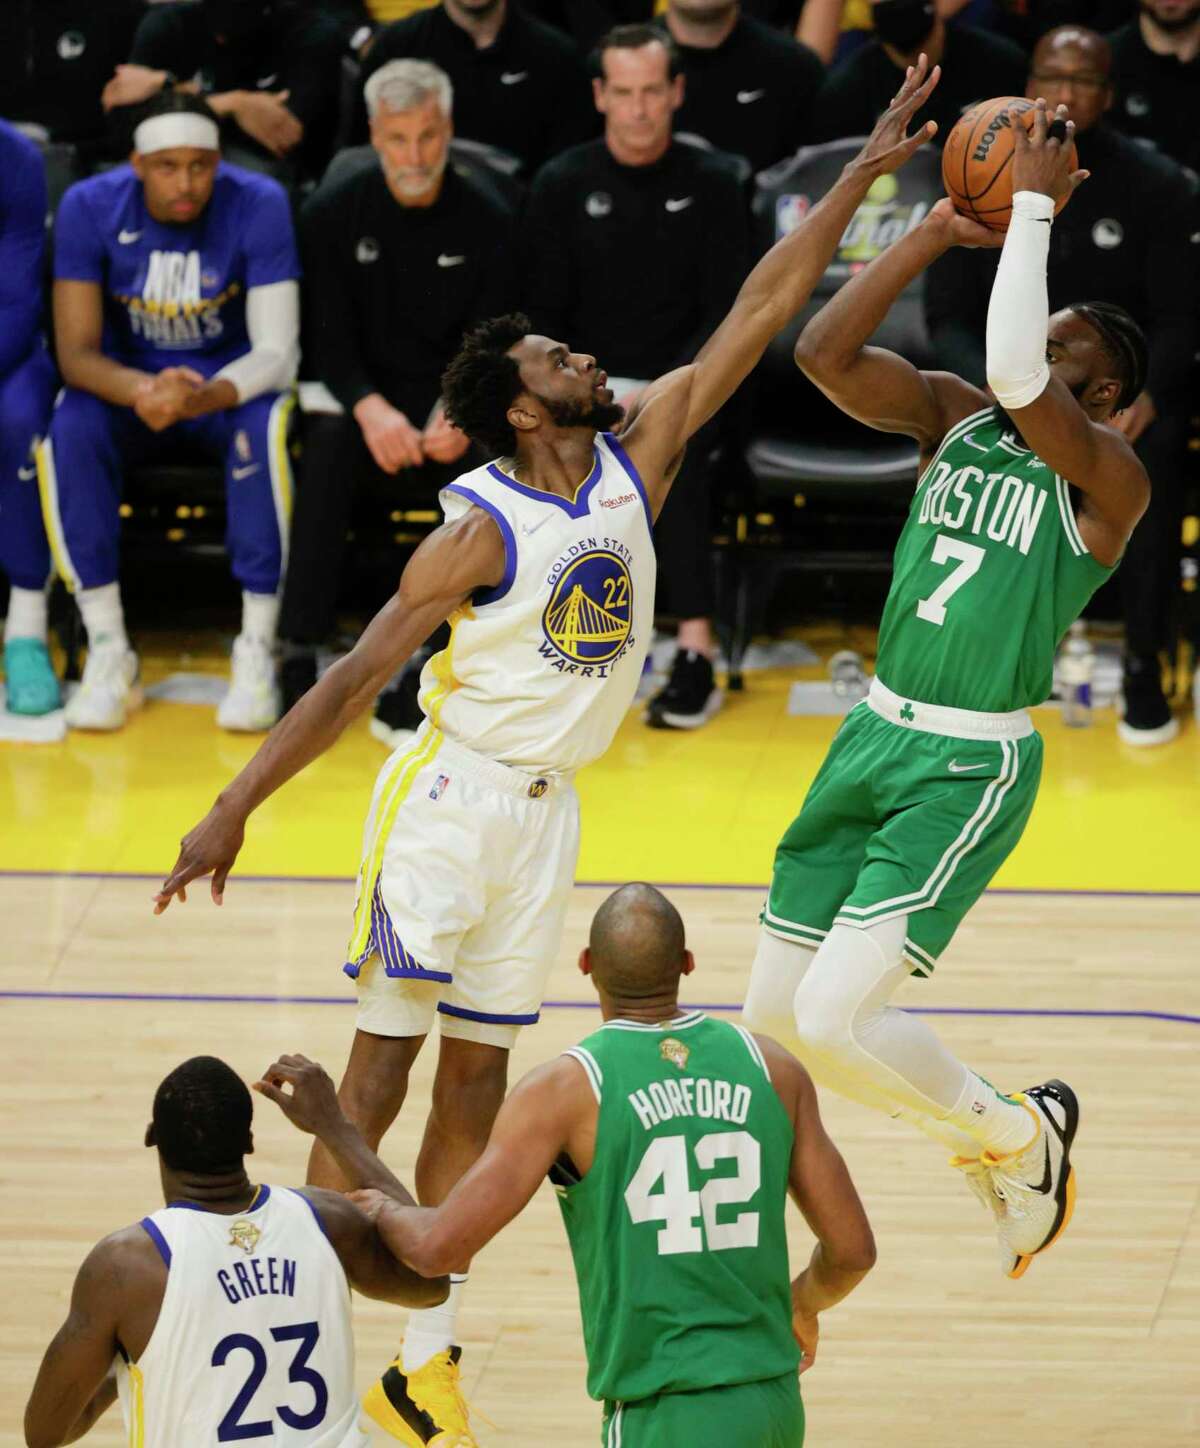 Golden State Warriors' Andrew Wiggins, 22, defends against Boston Celtics' Jaylen Brown, 7, during the second quarter of the NBA Finals at Chase Center in San Francisco, Calif., on Thursday, June 2, 2022.